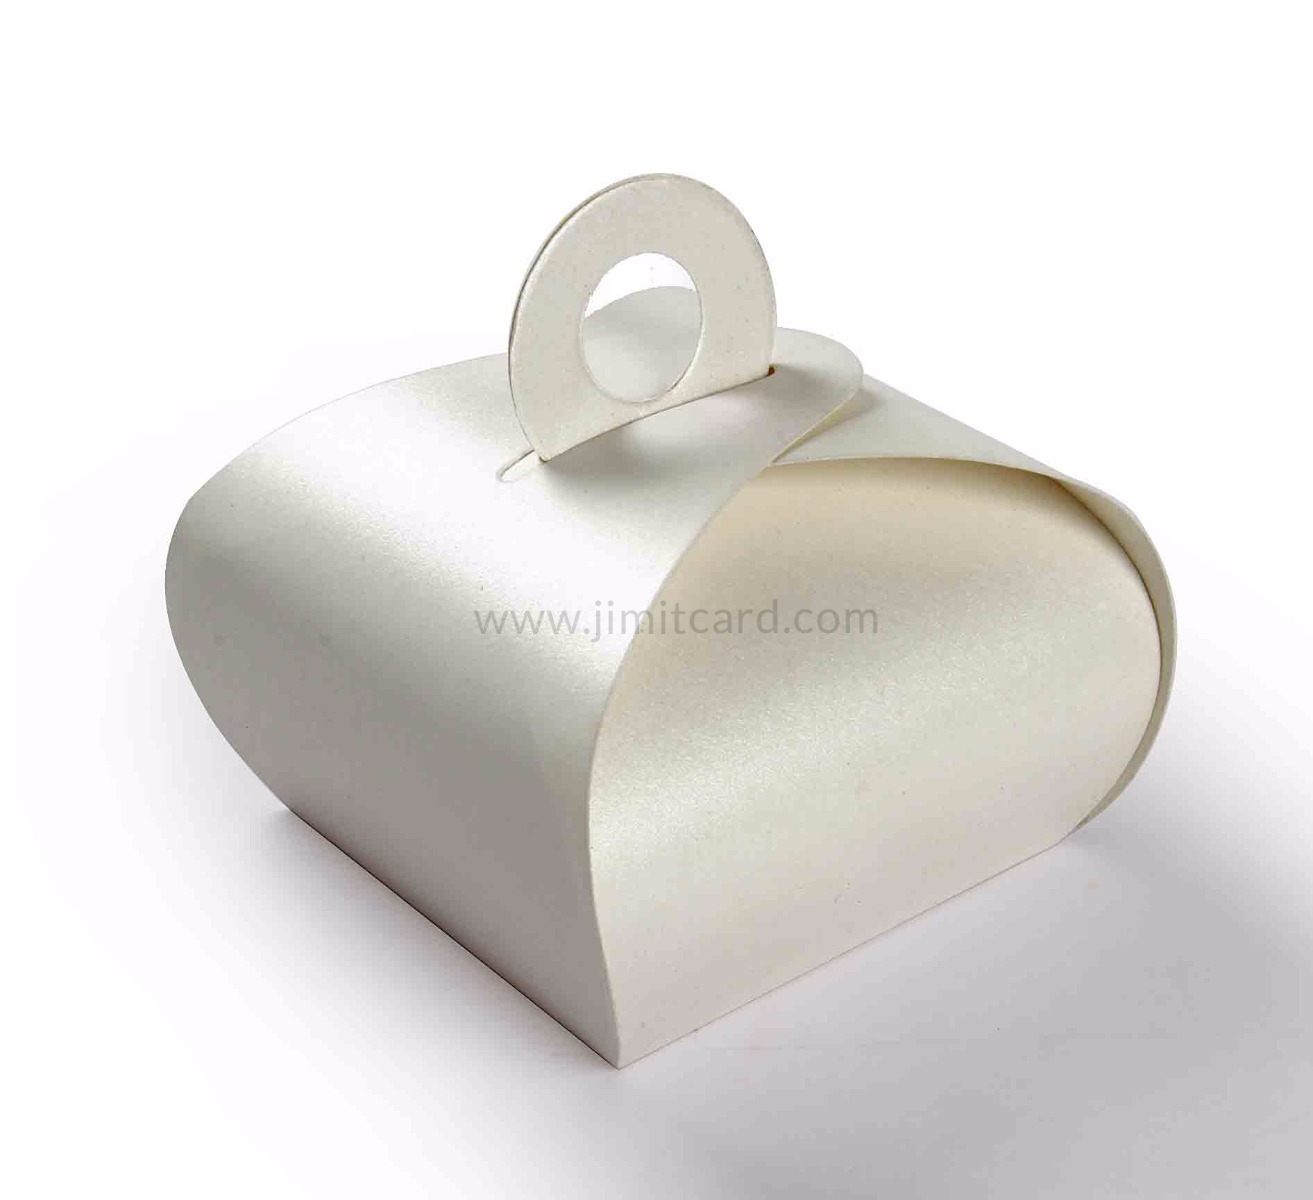 Roll top party Favor Box in White Color with a holder